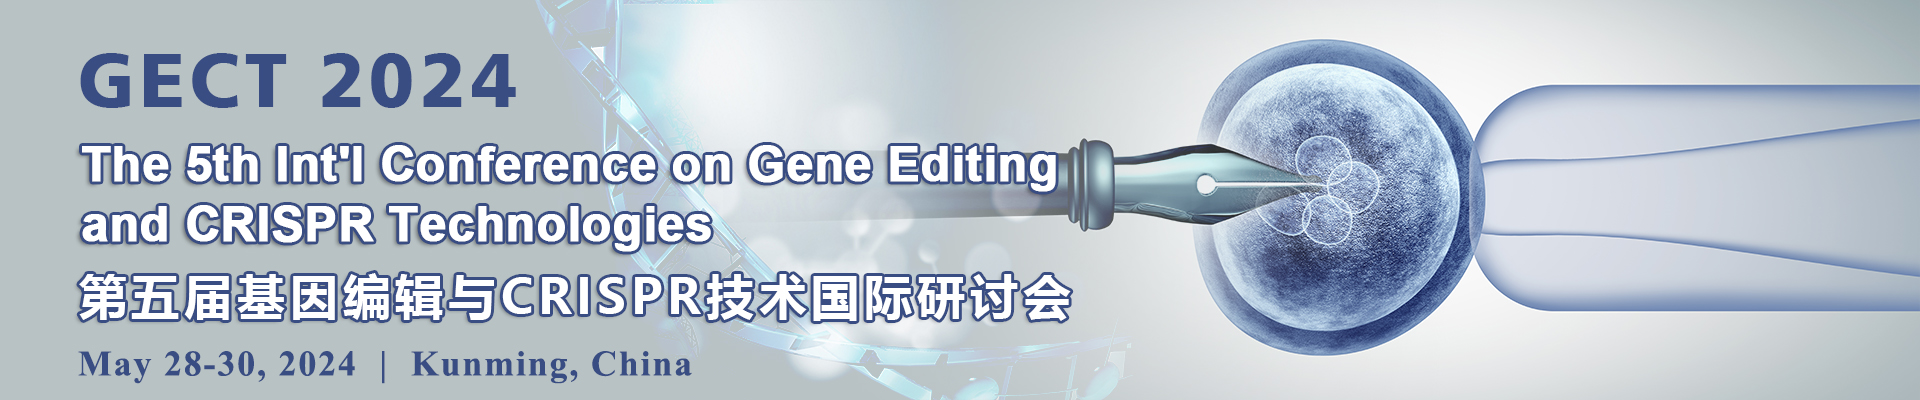 The 5th Int'l Conference on Gene Editing and CRISPR Technologies (GECT 2024), Kunming, Yunnan, China